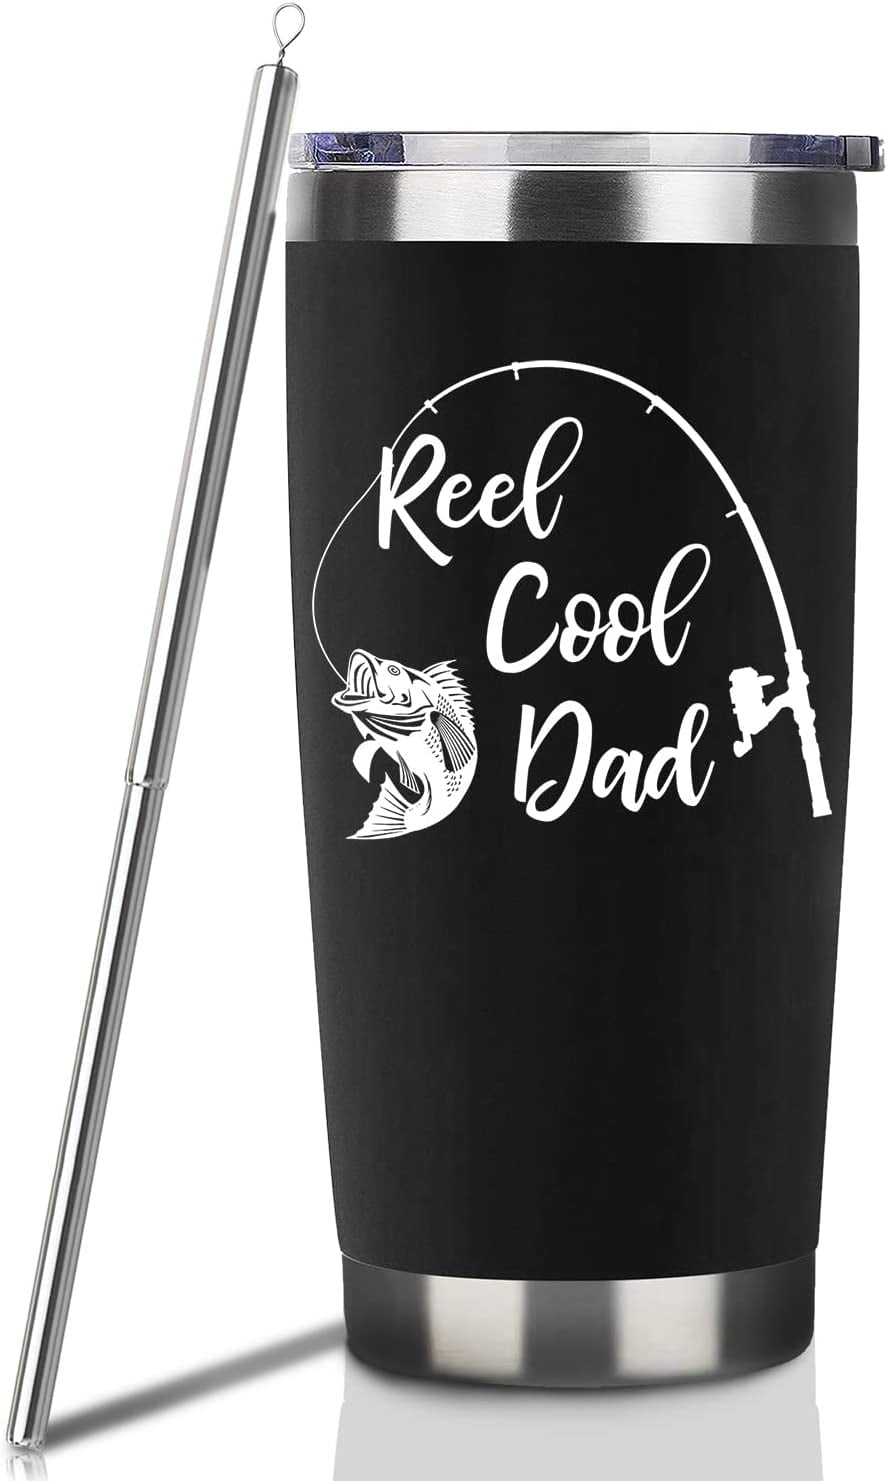 Christmas Gifts for Men, Gifts for Dad 20oz Tumbler Cup - Funny Gift Idea  for Husband, Grandpa, Fath…See more Christmas Gifts for Men, Gifts for Dad